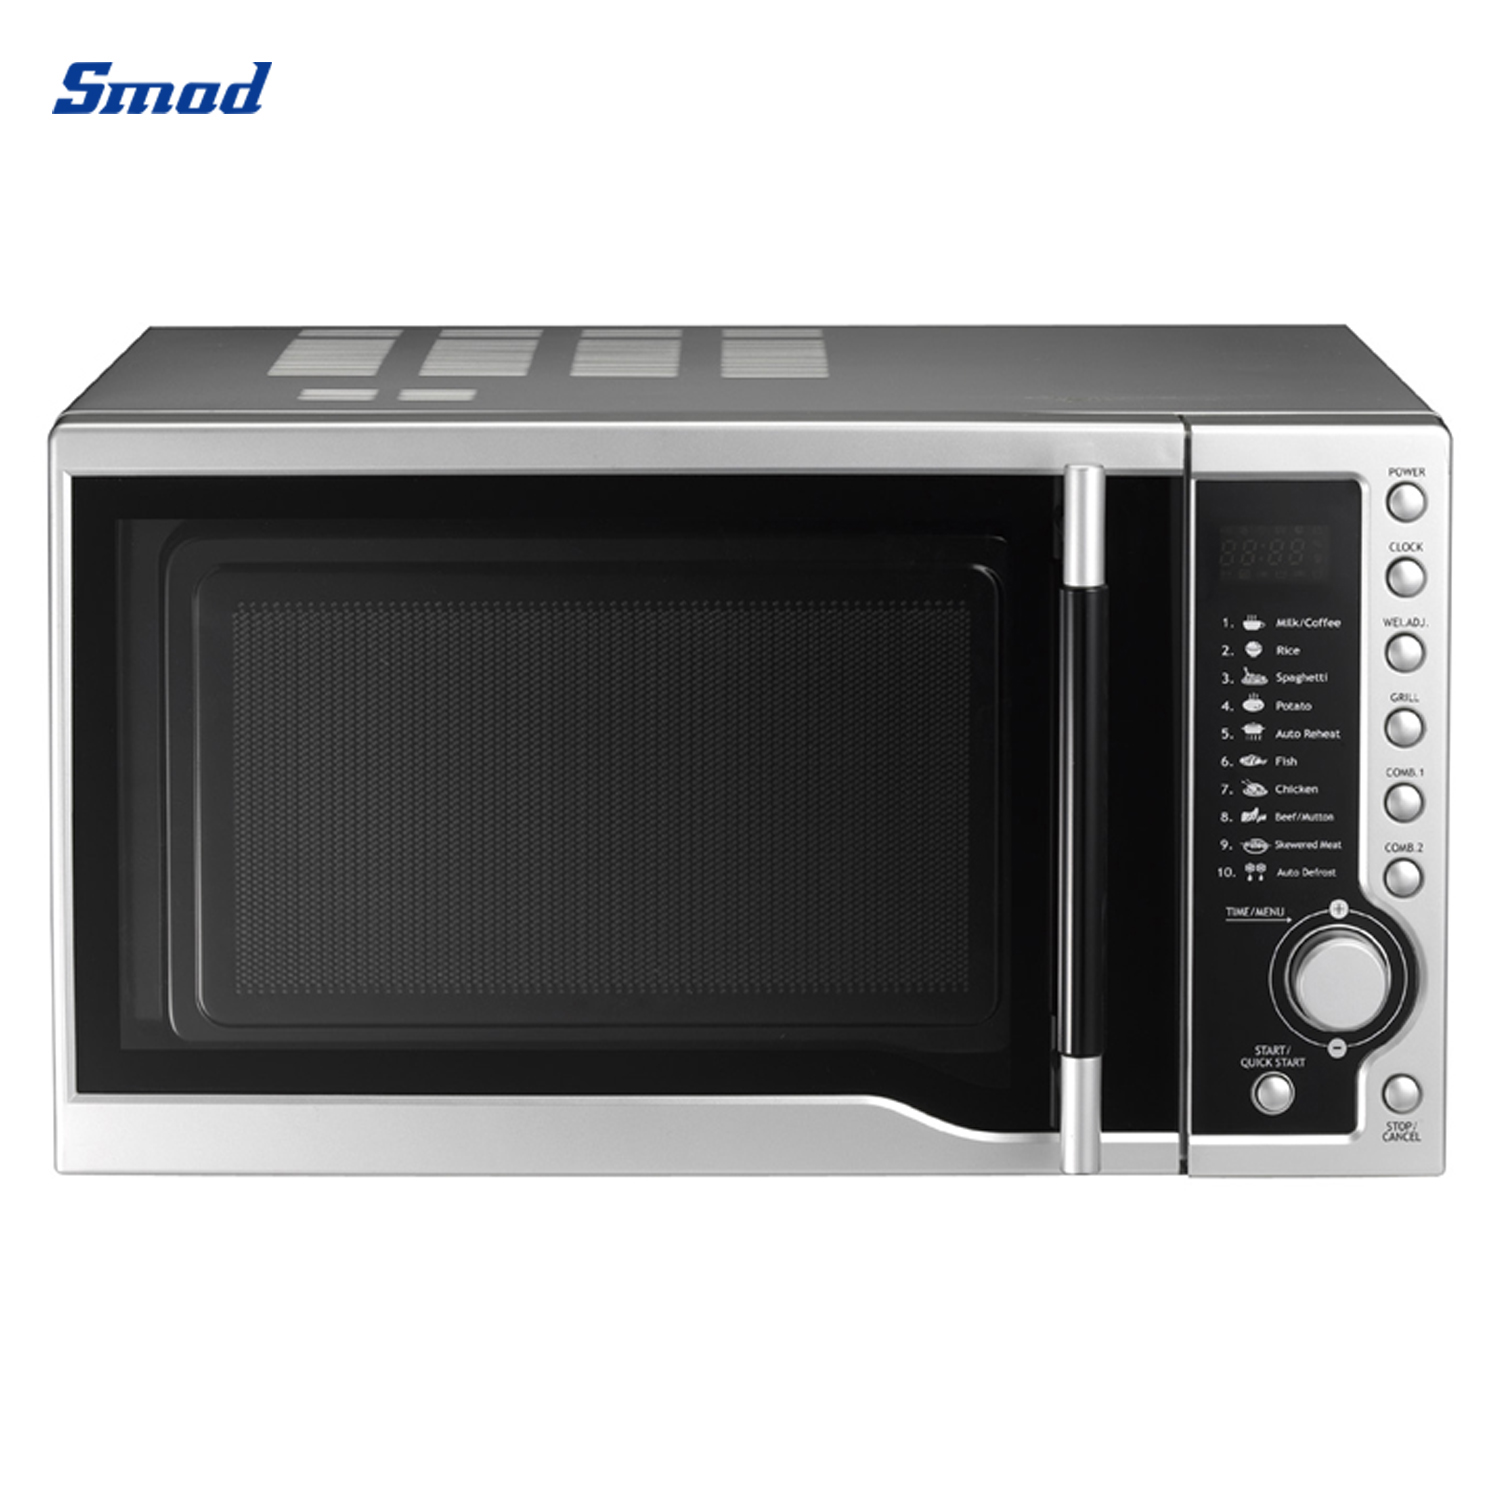 
Smad 0.7/0.8 Cu. Ft. Compact Countertop Microwave Oven with Speed Defrost
